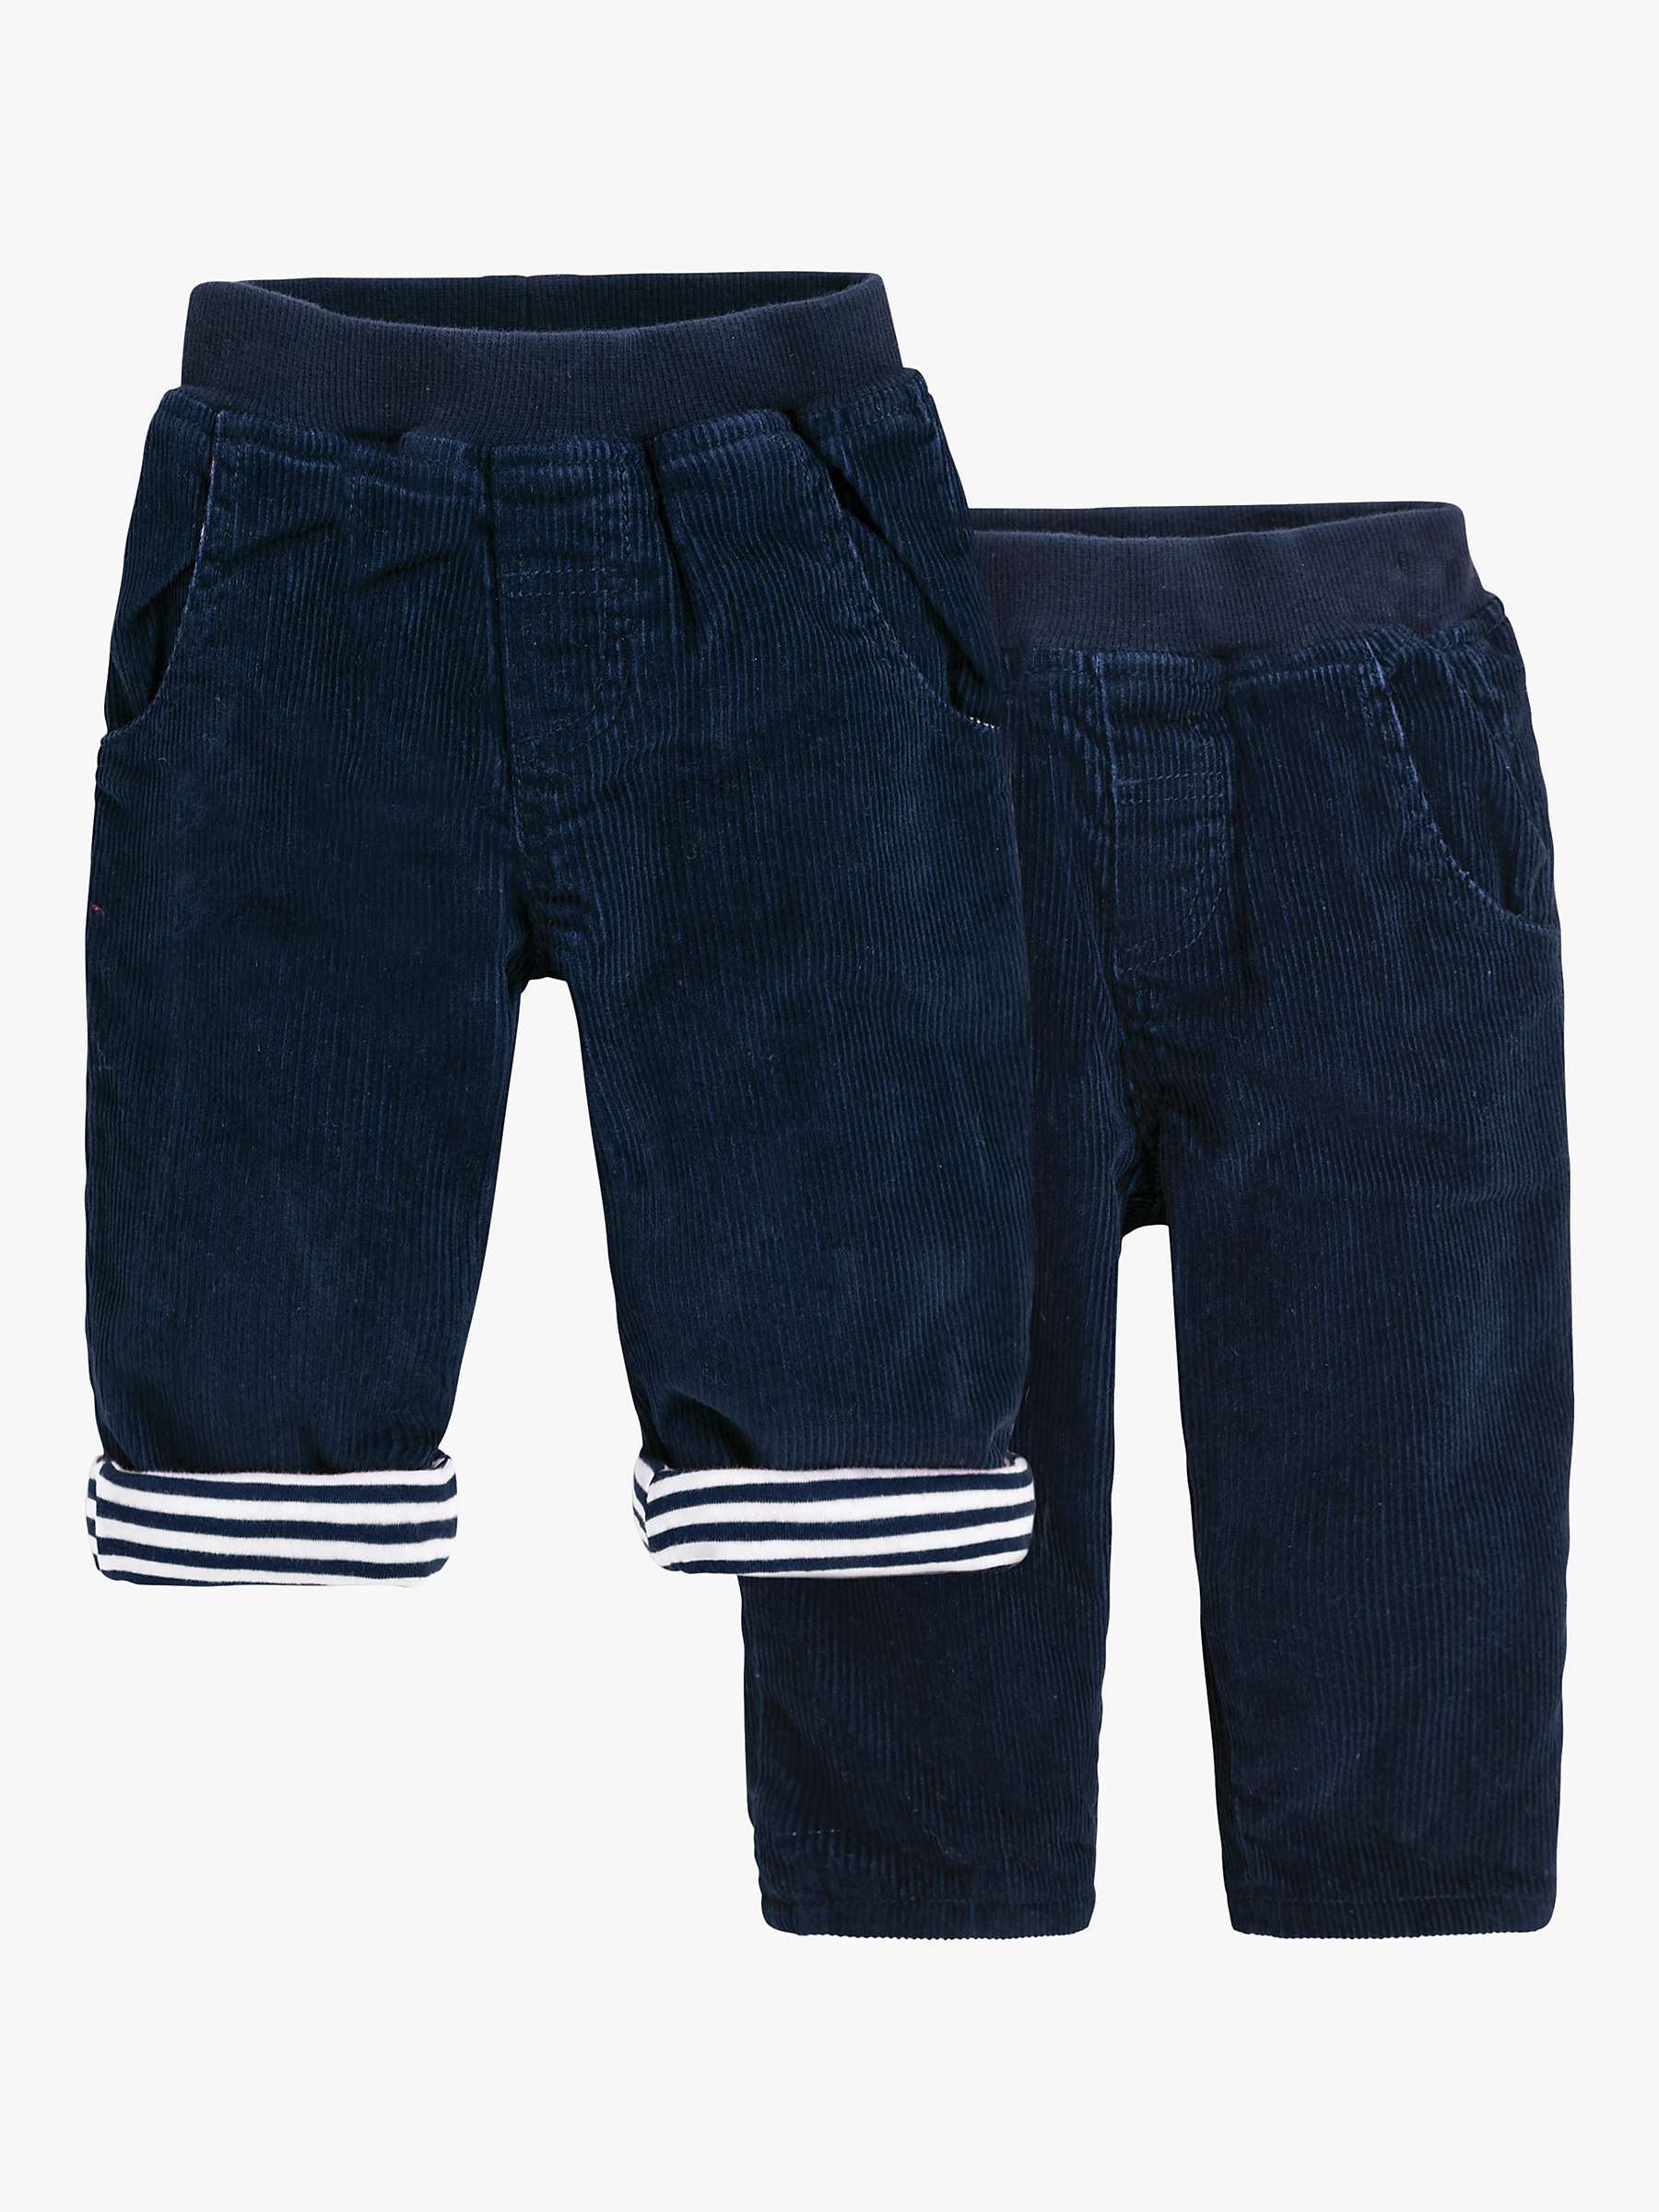 Buy JoJo Maman Bébé Baby Cord Pull Up Trousers, Navy Online at johnlewis.com